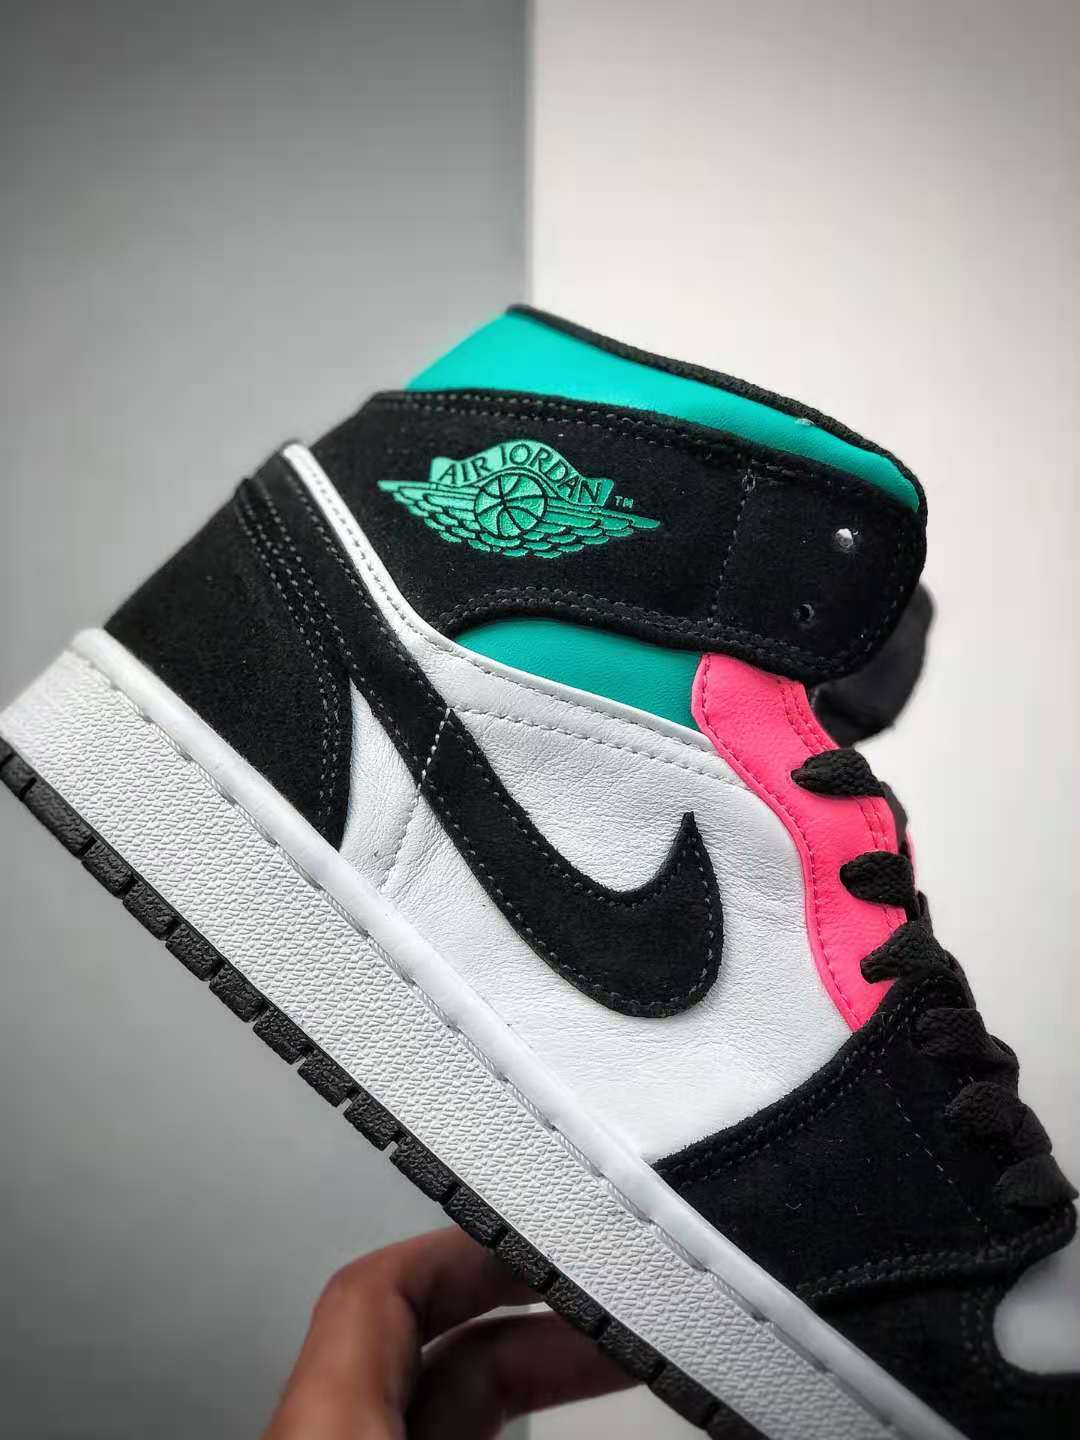 Air Jordan 1 Mid SE 'South Beach' 852542-116 - Exclusive Sneakers at Great Prices!